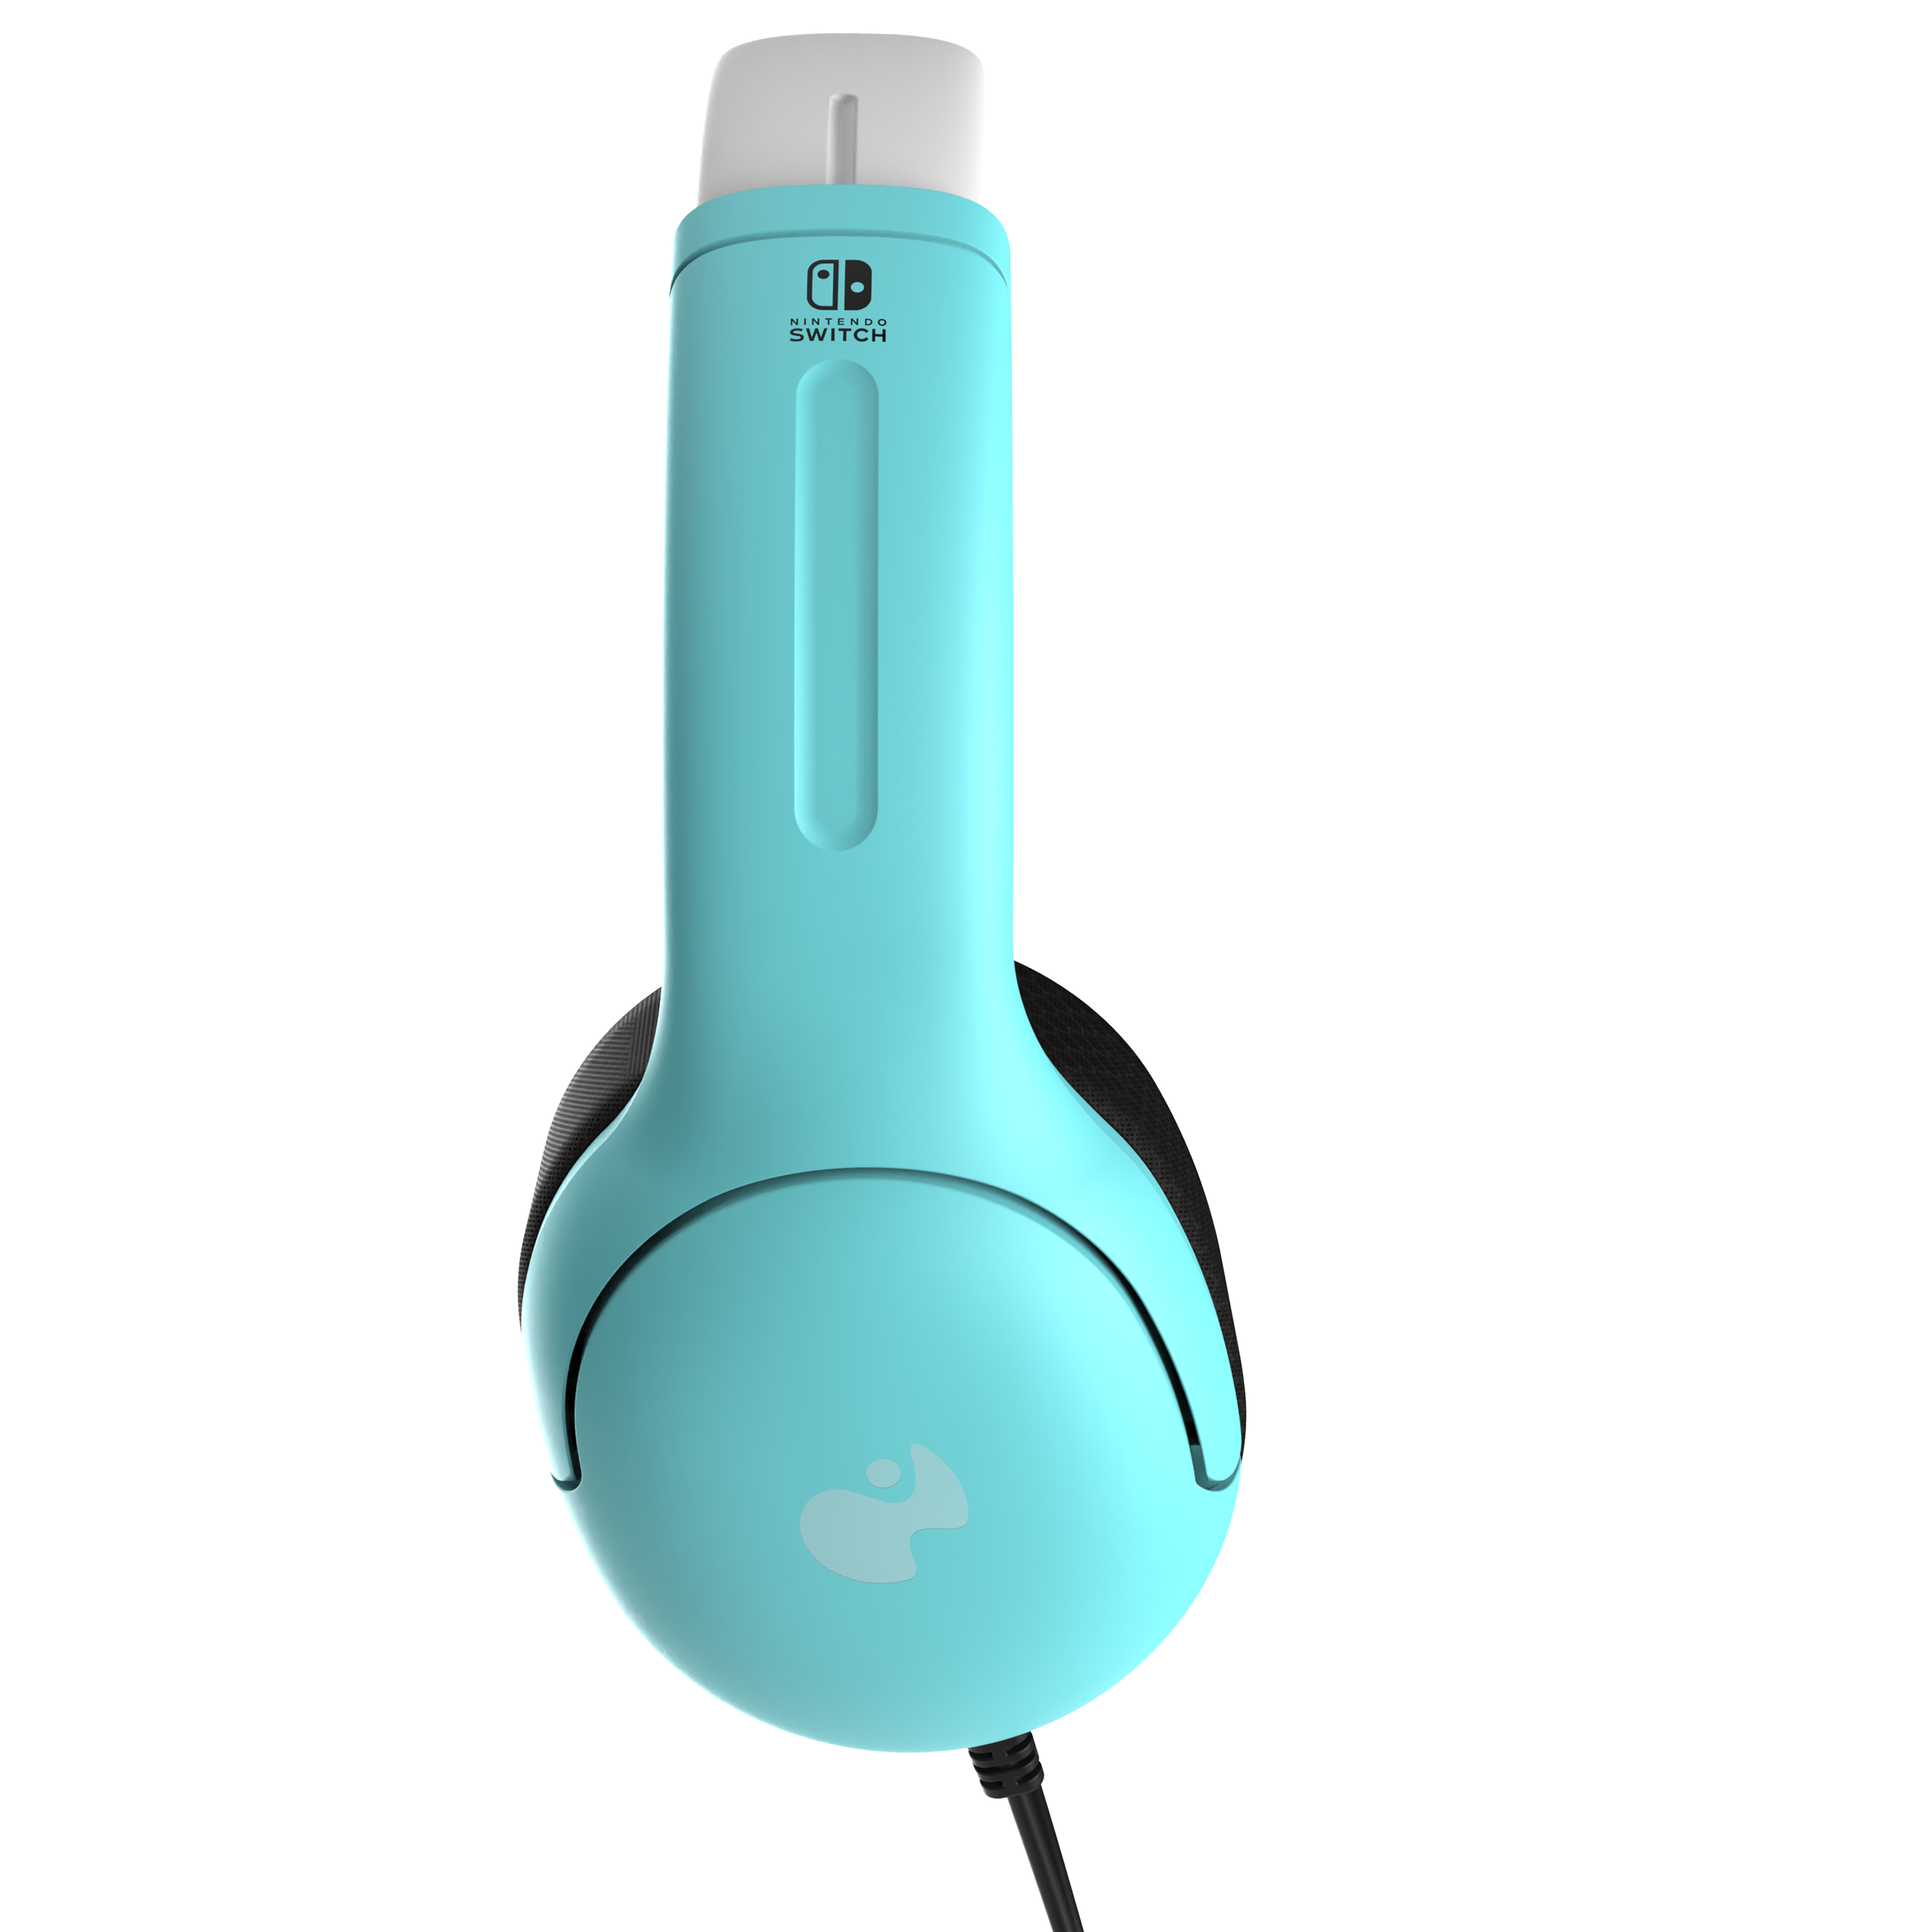 The Best Value Nintendo Switch Stereo Headset? Officially Licensed